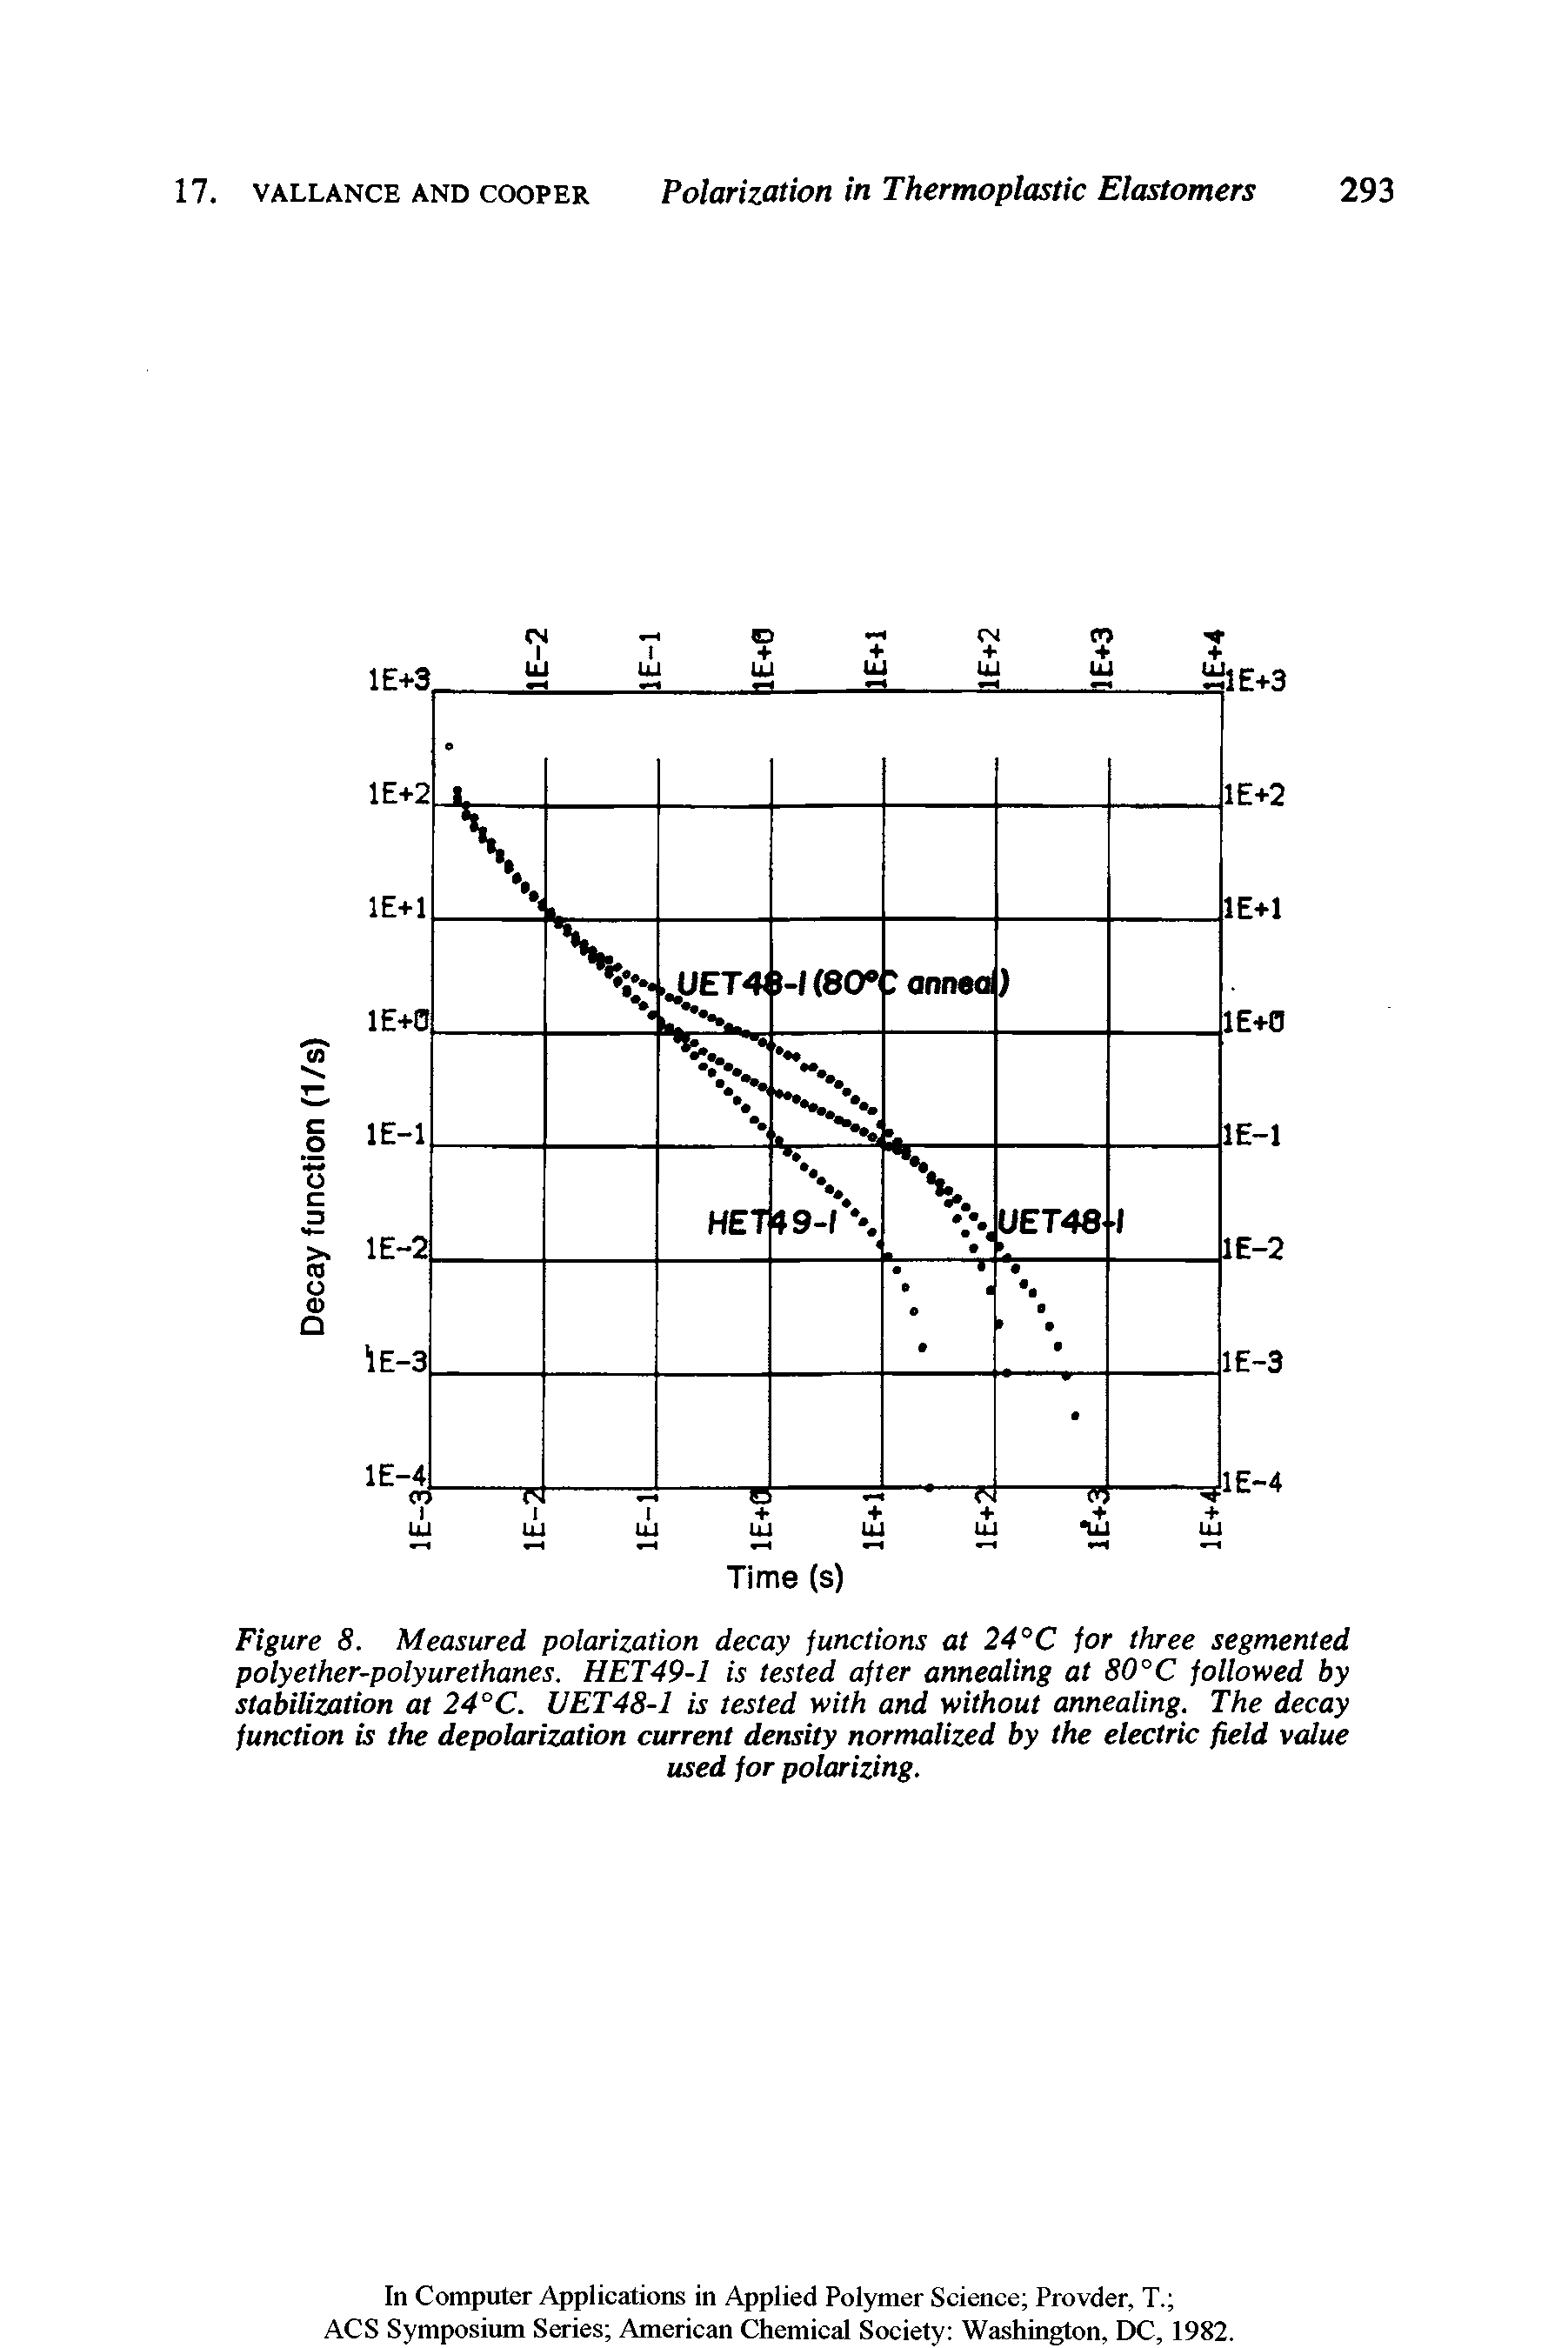 Figure 8. Measured polarization decay functions at 24°C for three segmented polyether-polyurethanes. HET49-1 is tested after annealing at 80°C followed by stabilization at 24°C. UET48-1 is tested with and without annealing. The decay function is the depolarization current density normalized by the electric field value...